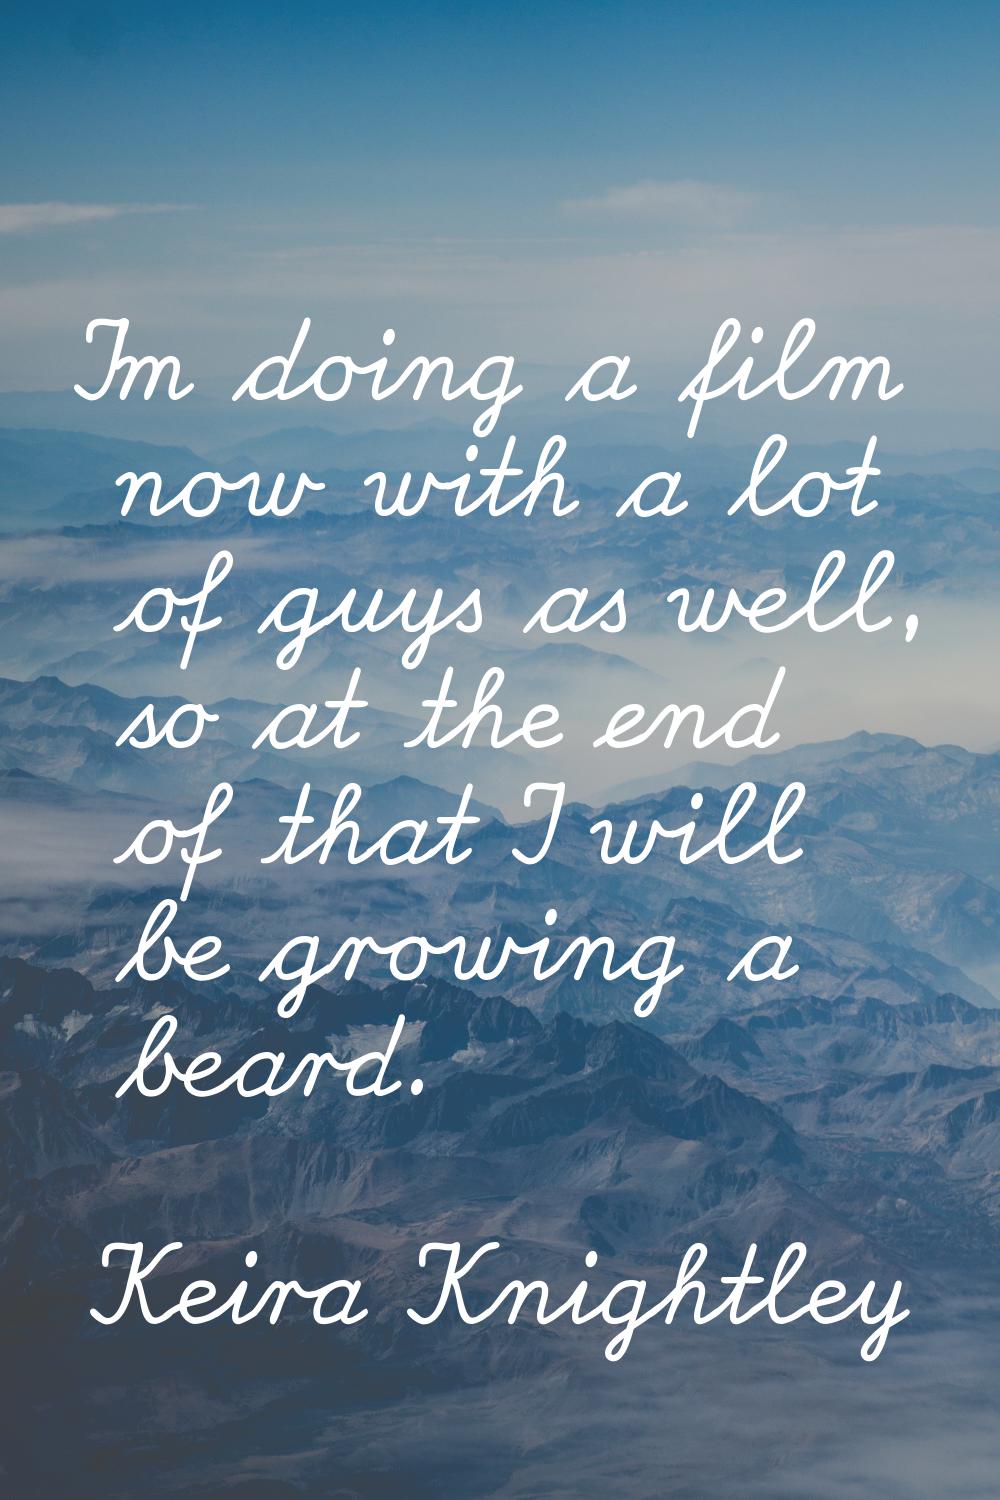 I'm doing a film now with a lot of guys as well, so at the end of that I will be growing a beard.